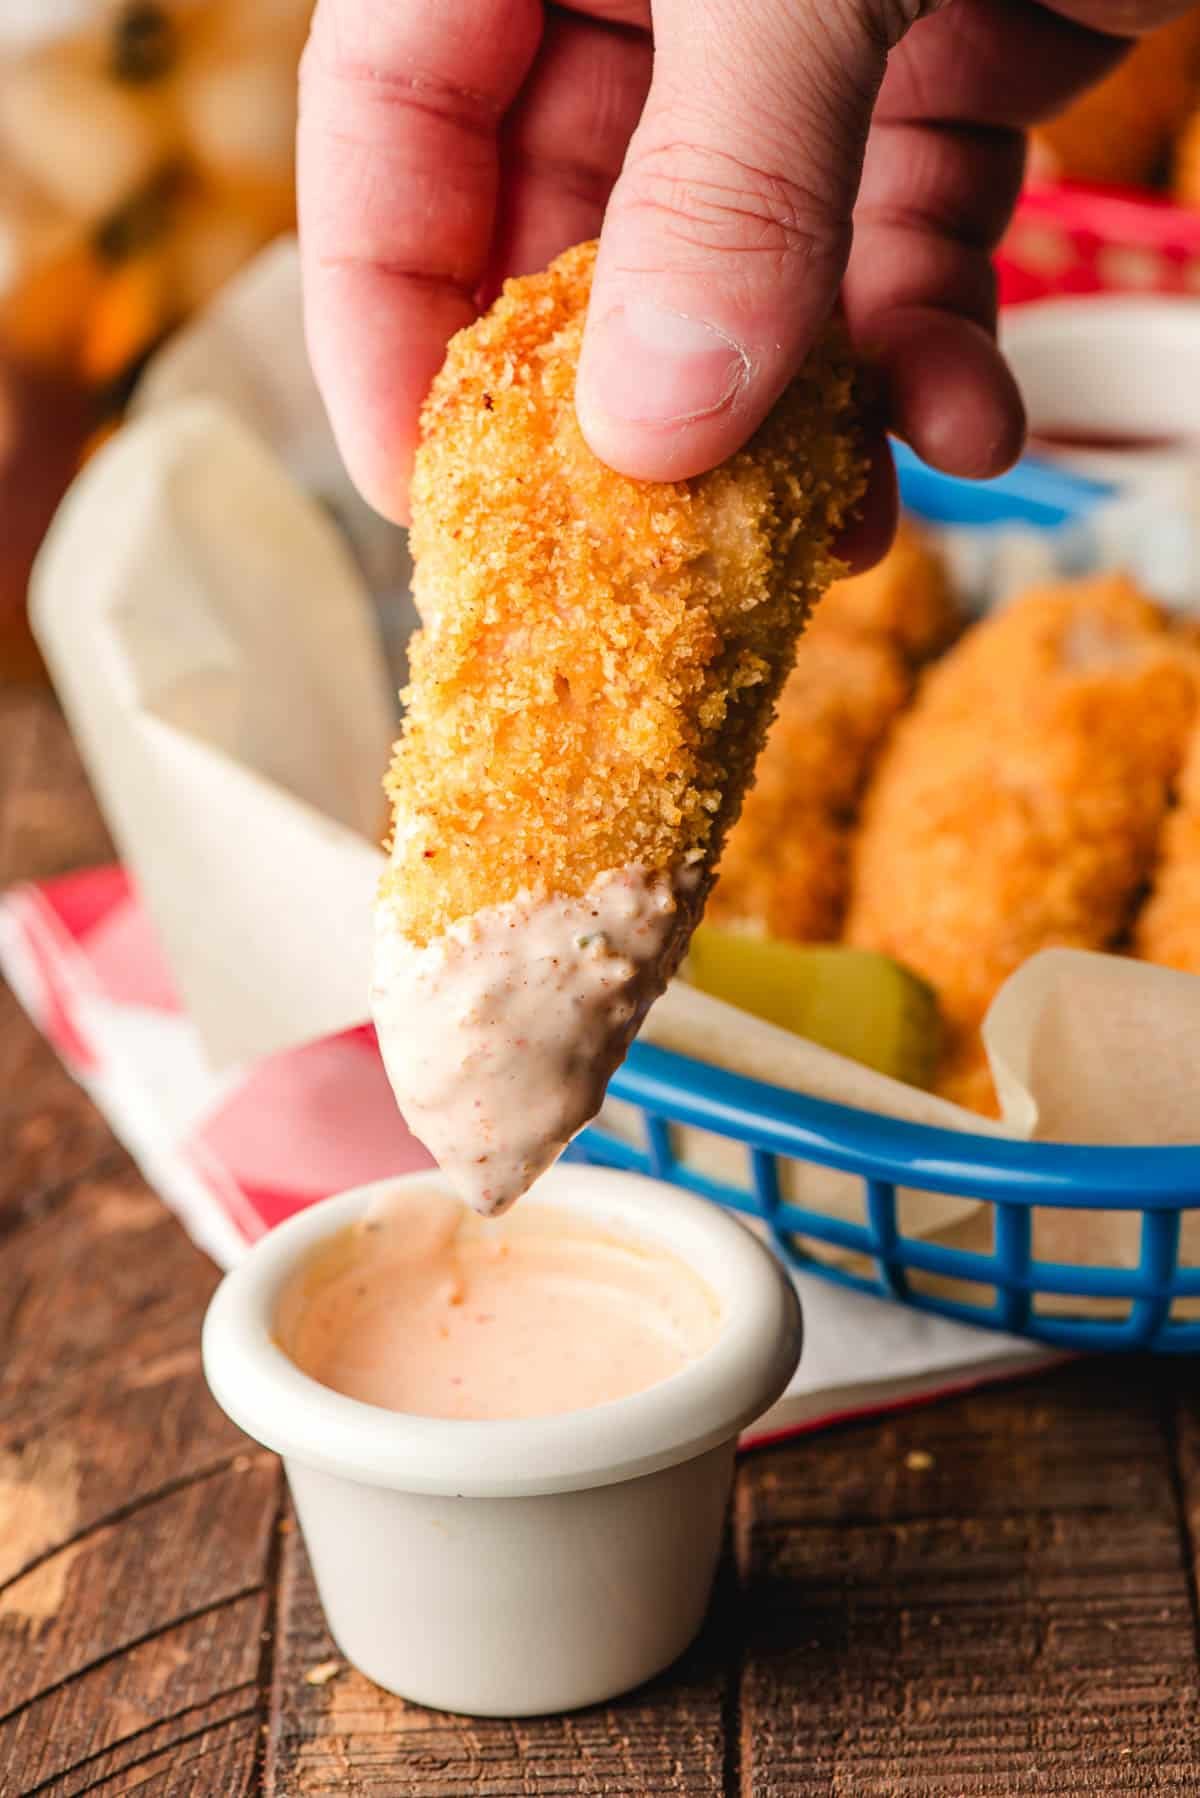 Panko crusted chicken tender being dipped into a cup of Sriracha ranch.